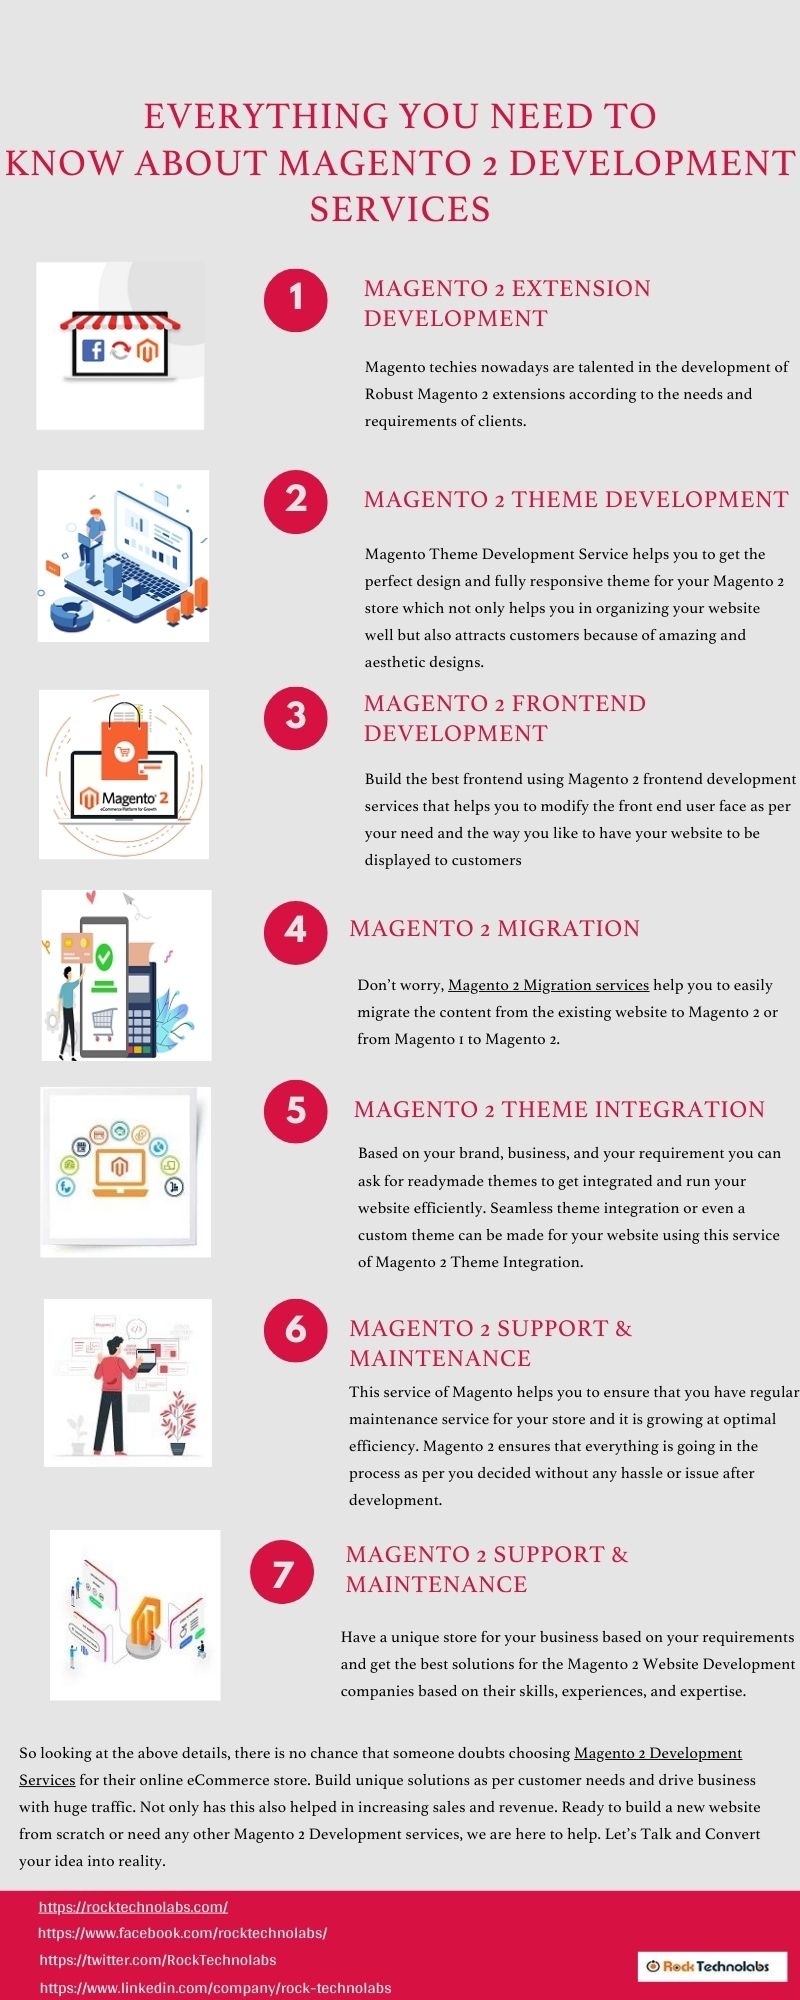 Magento News: Everything You Need To Know About Magento 2 Development Services